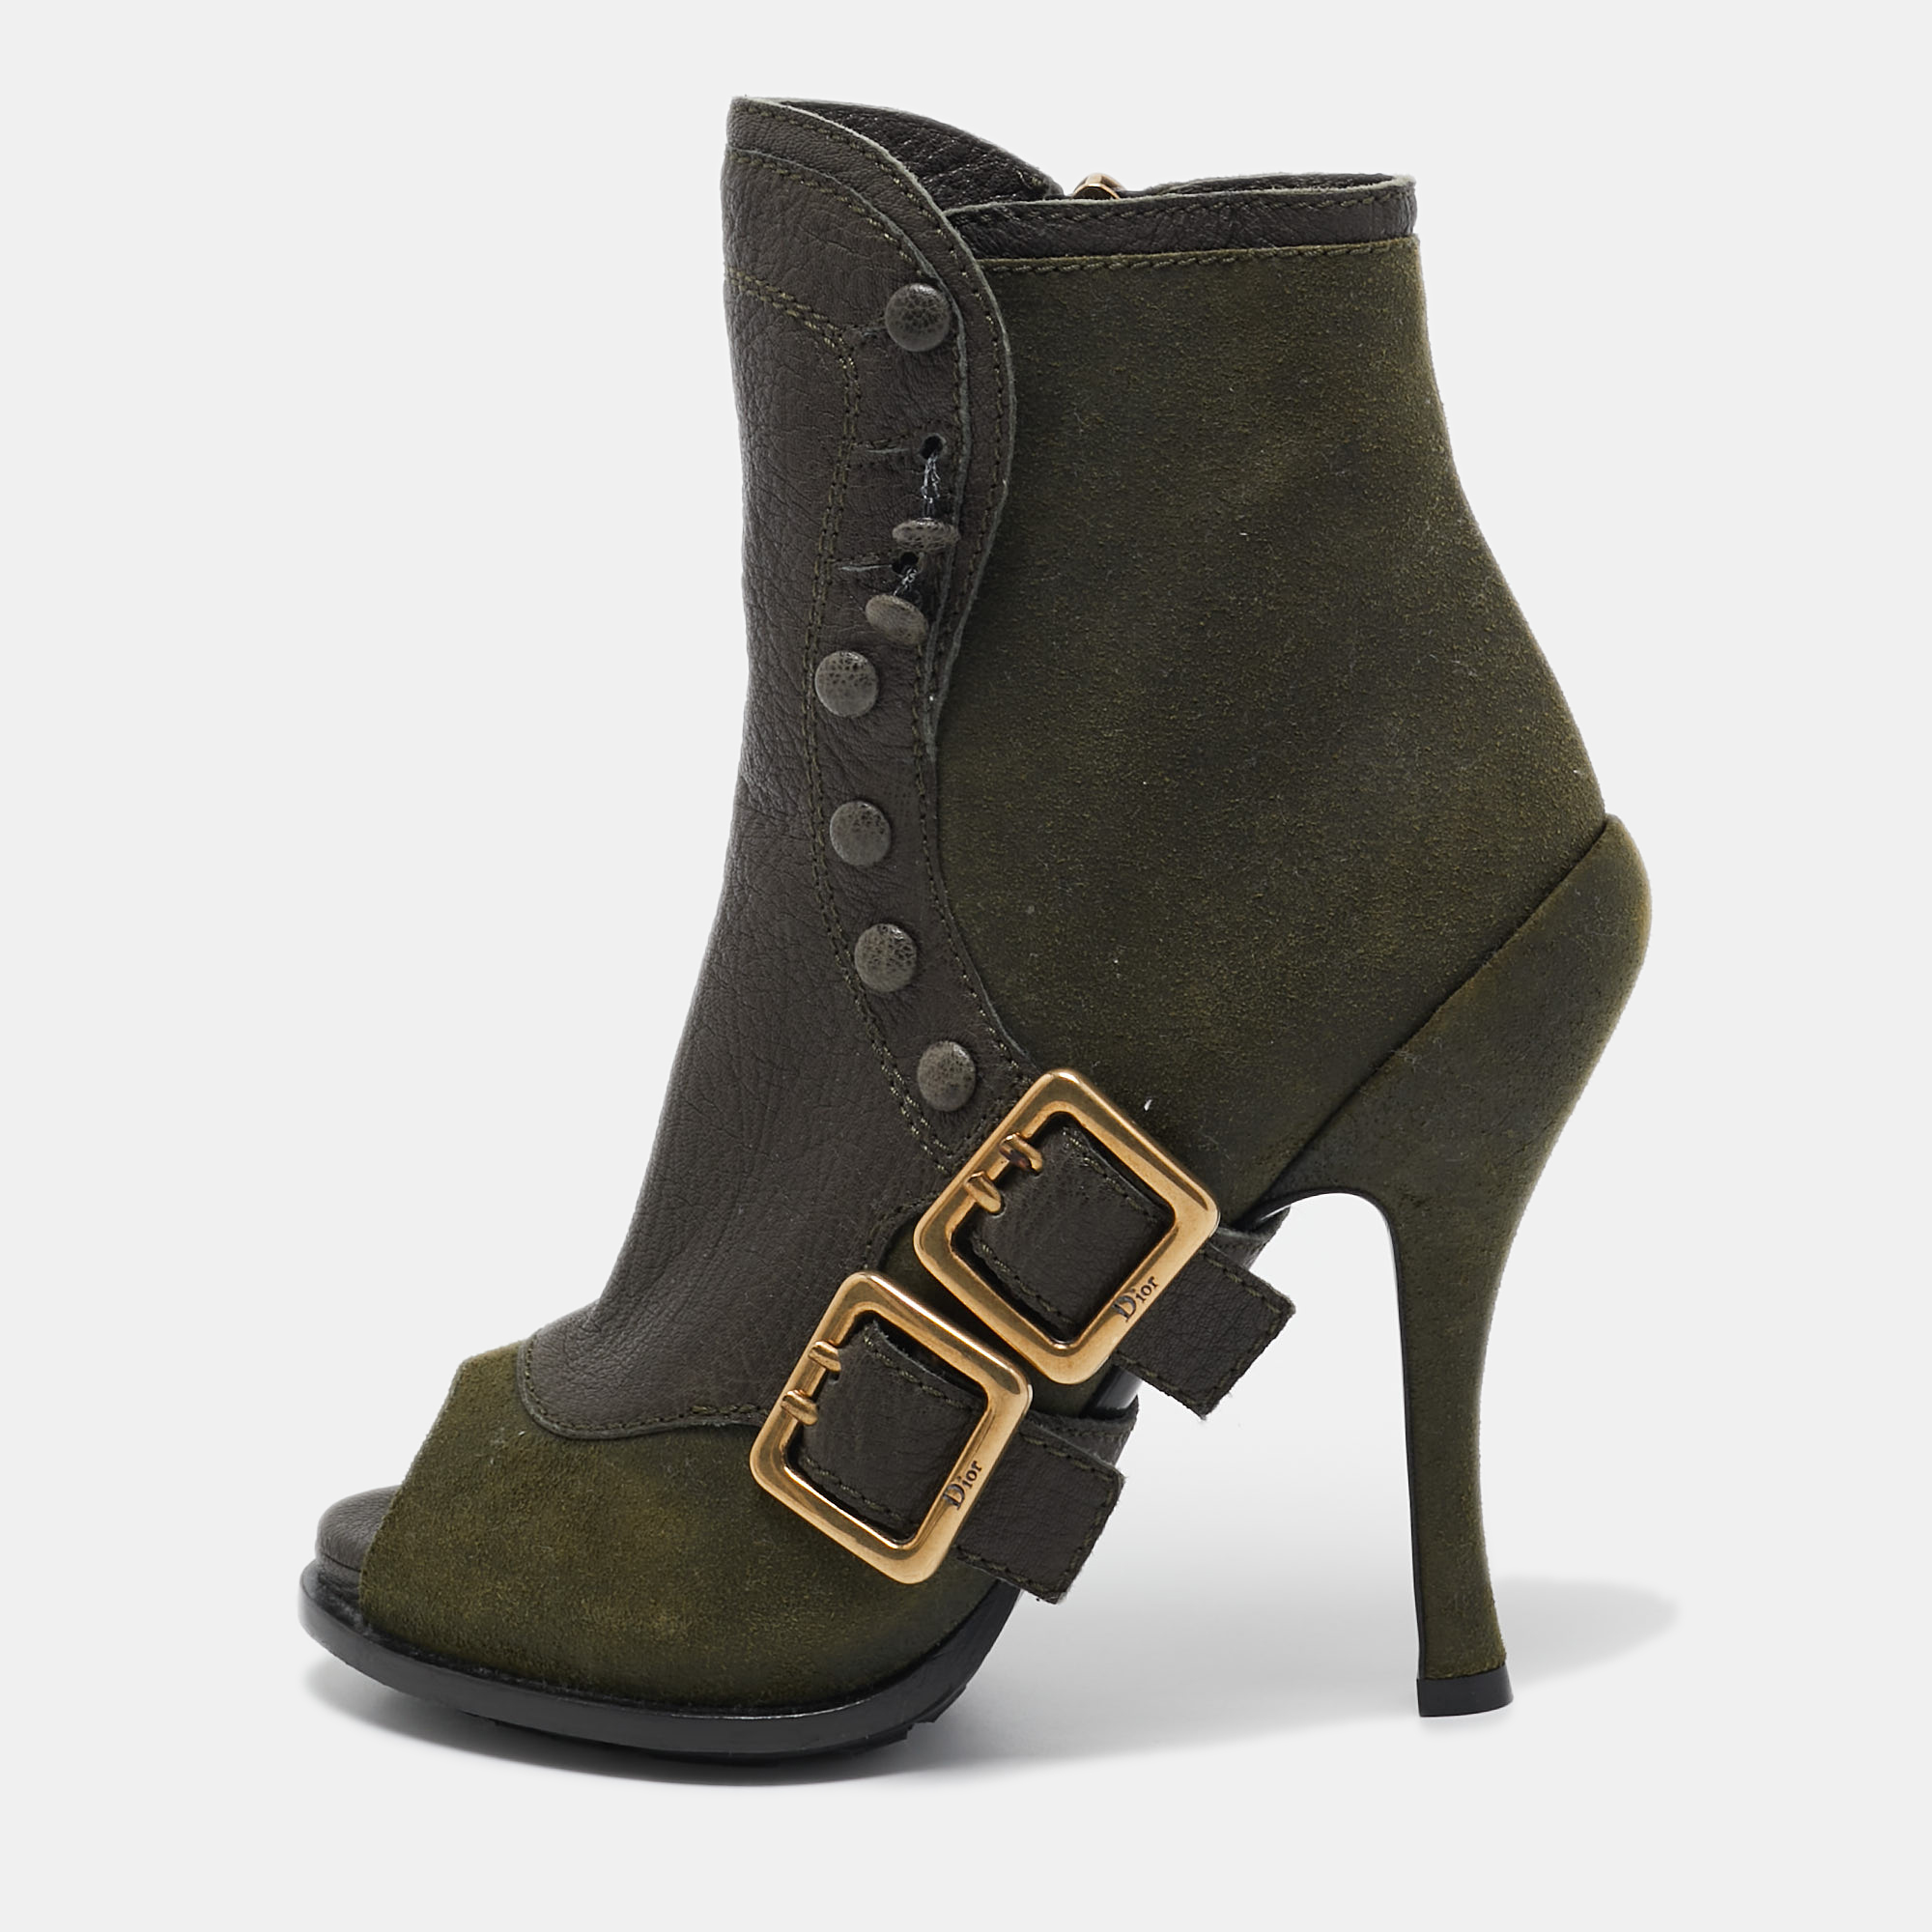 Dior Green Suede And Leather Peep Toe Ankle Boots Size 35.5